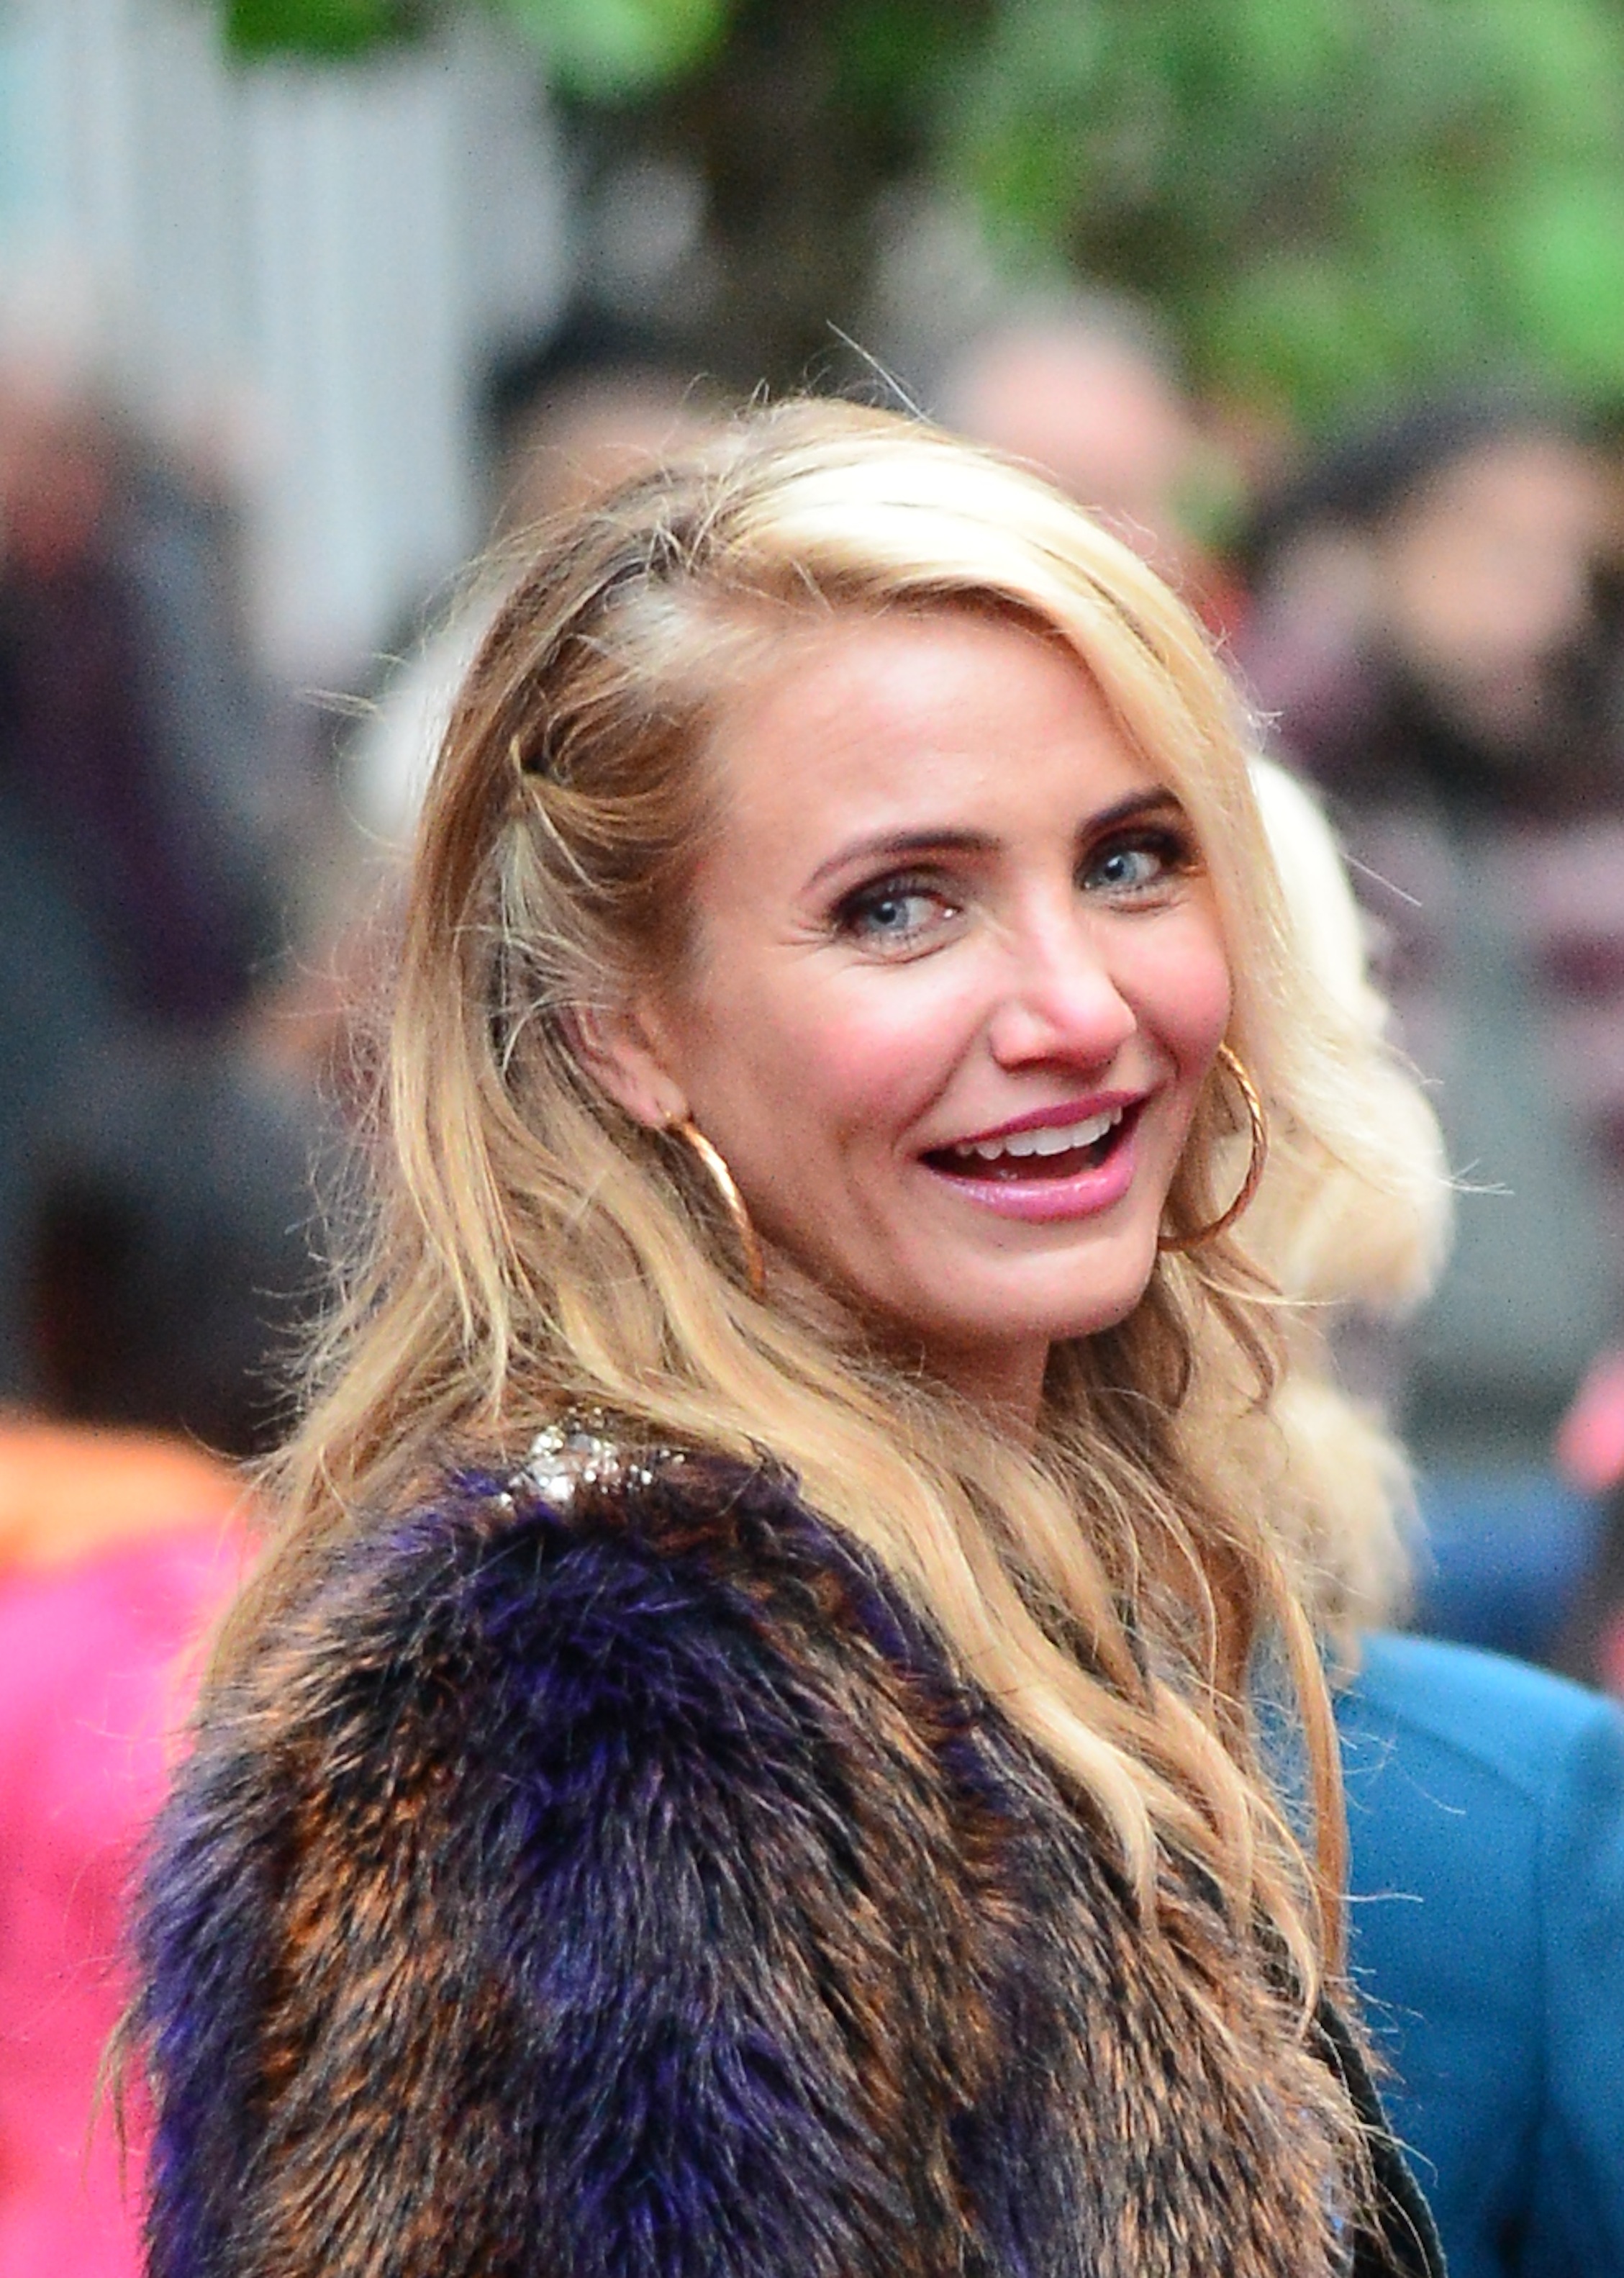 Cameron Diaz on the set of " Anna," in 2013 | Source: Getty Images